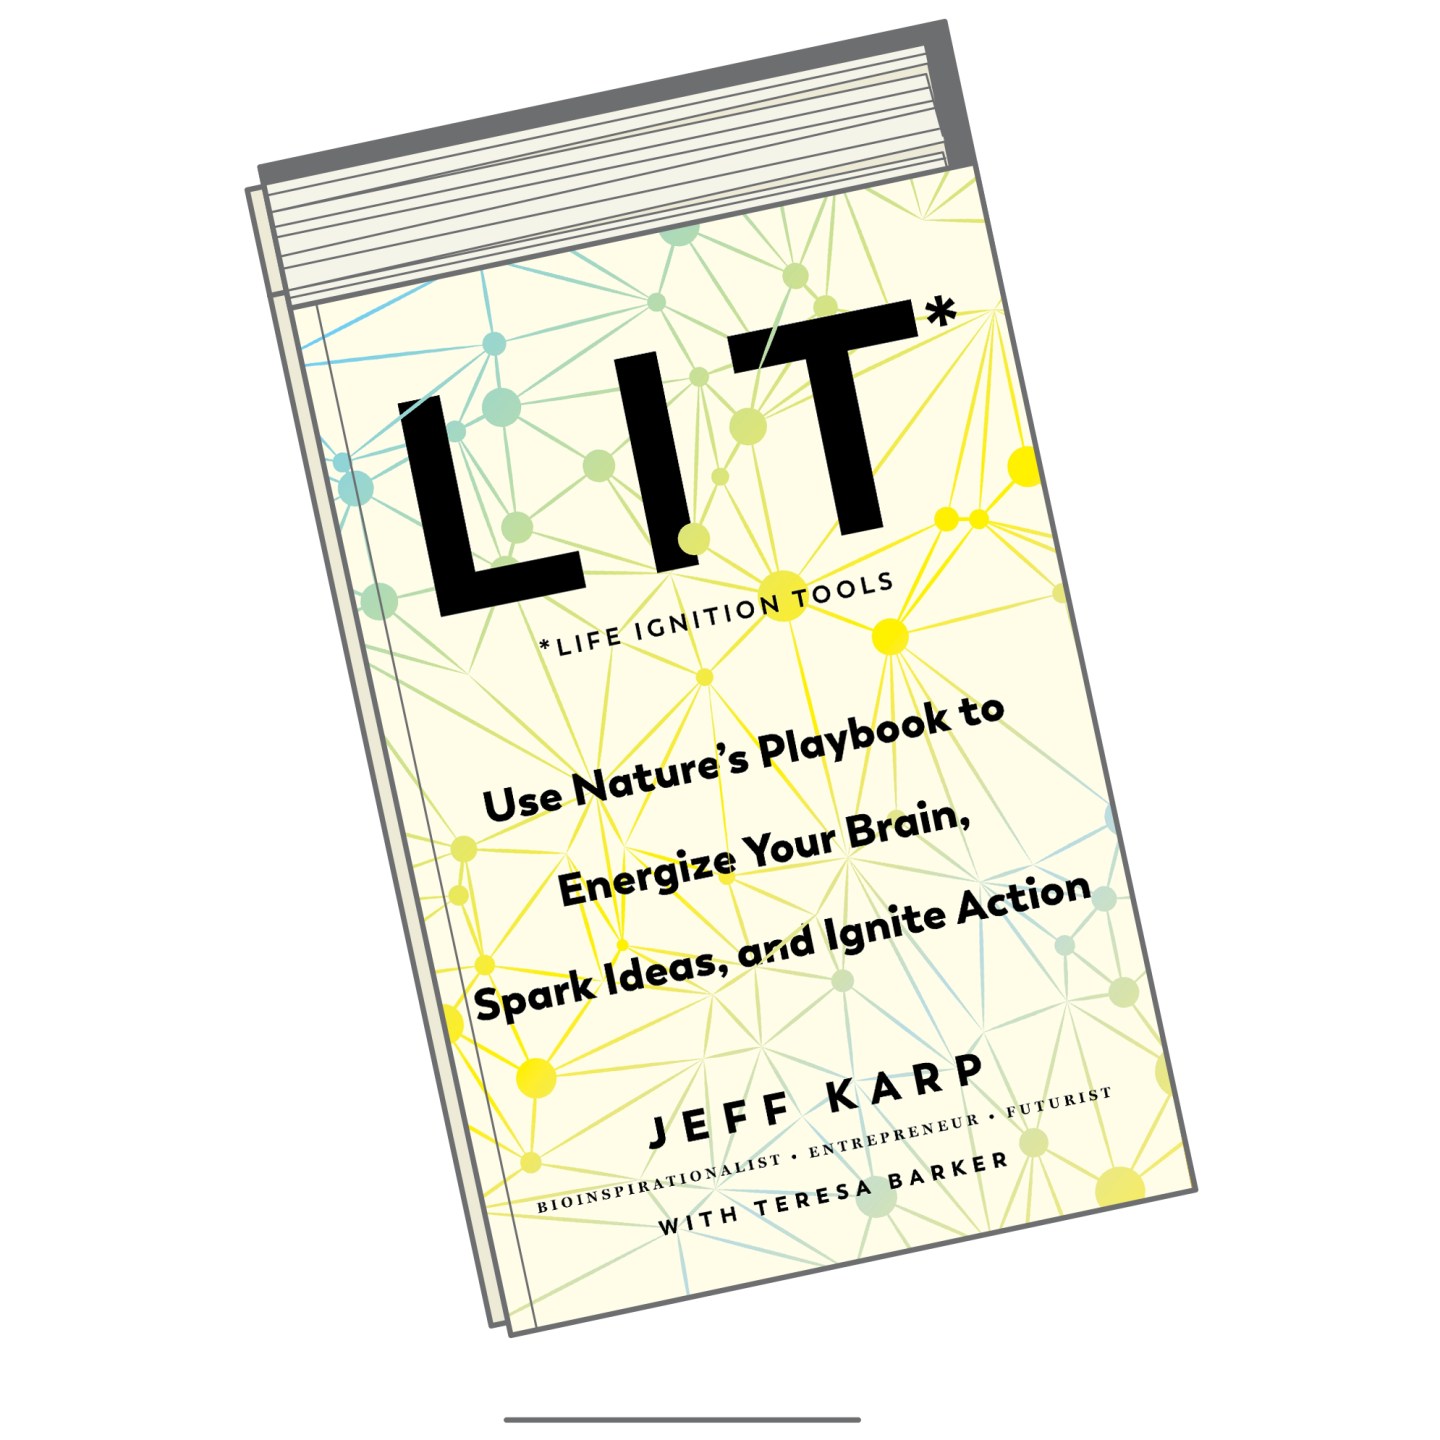 Jeff Karp, Ph.D. is the author of LIT: Use Nature’s Playbook to Energize Your Brain, Spark Ideas, and Ignite Action